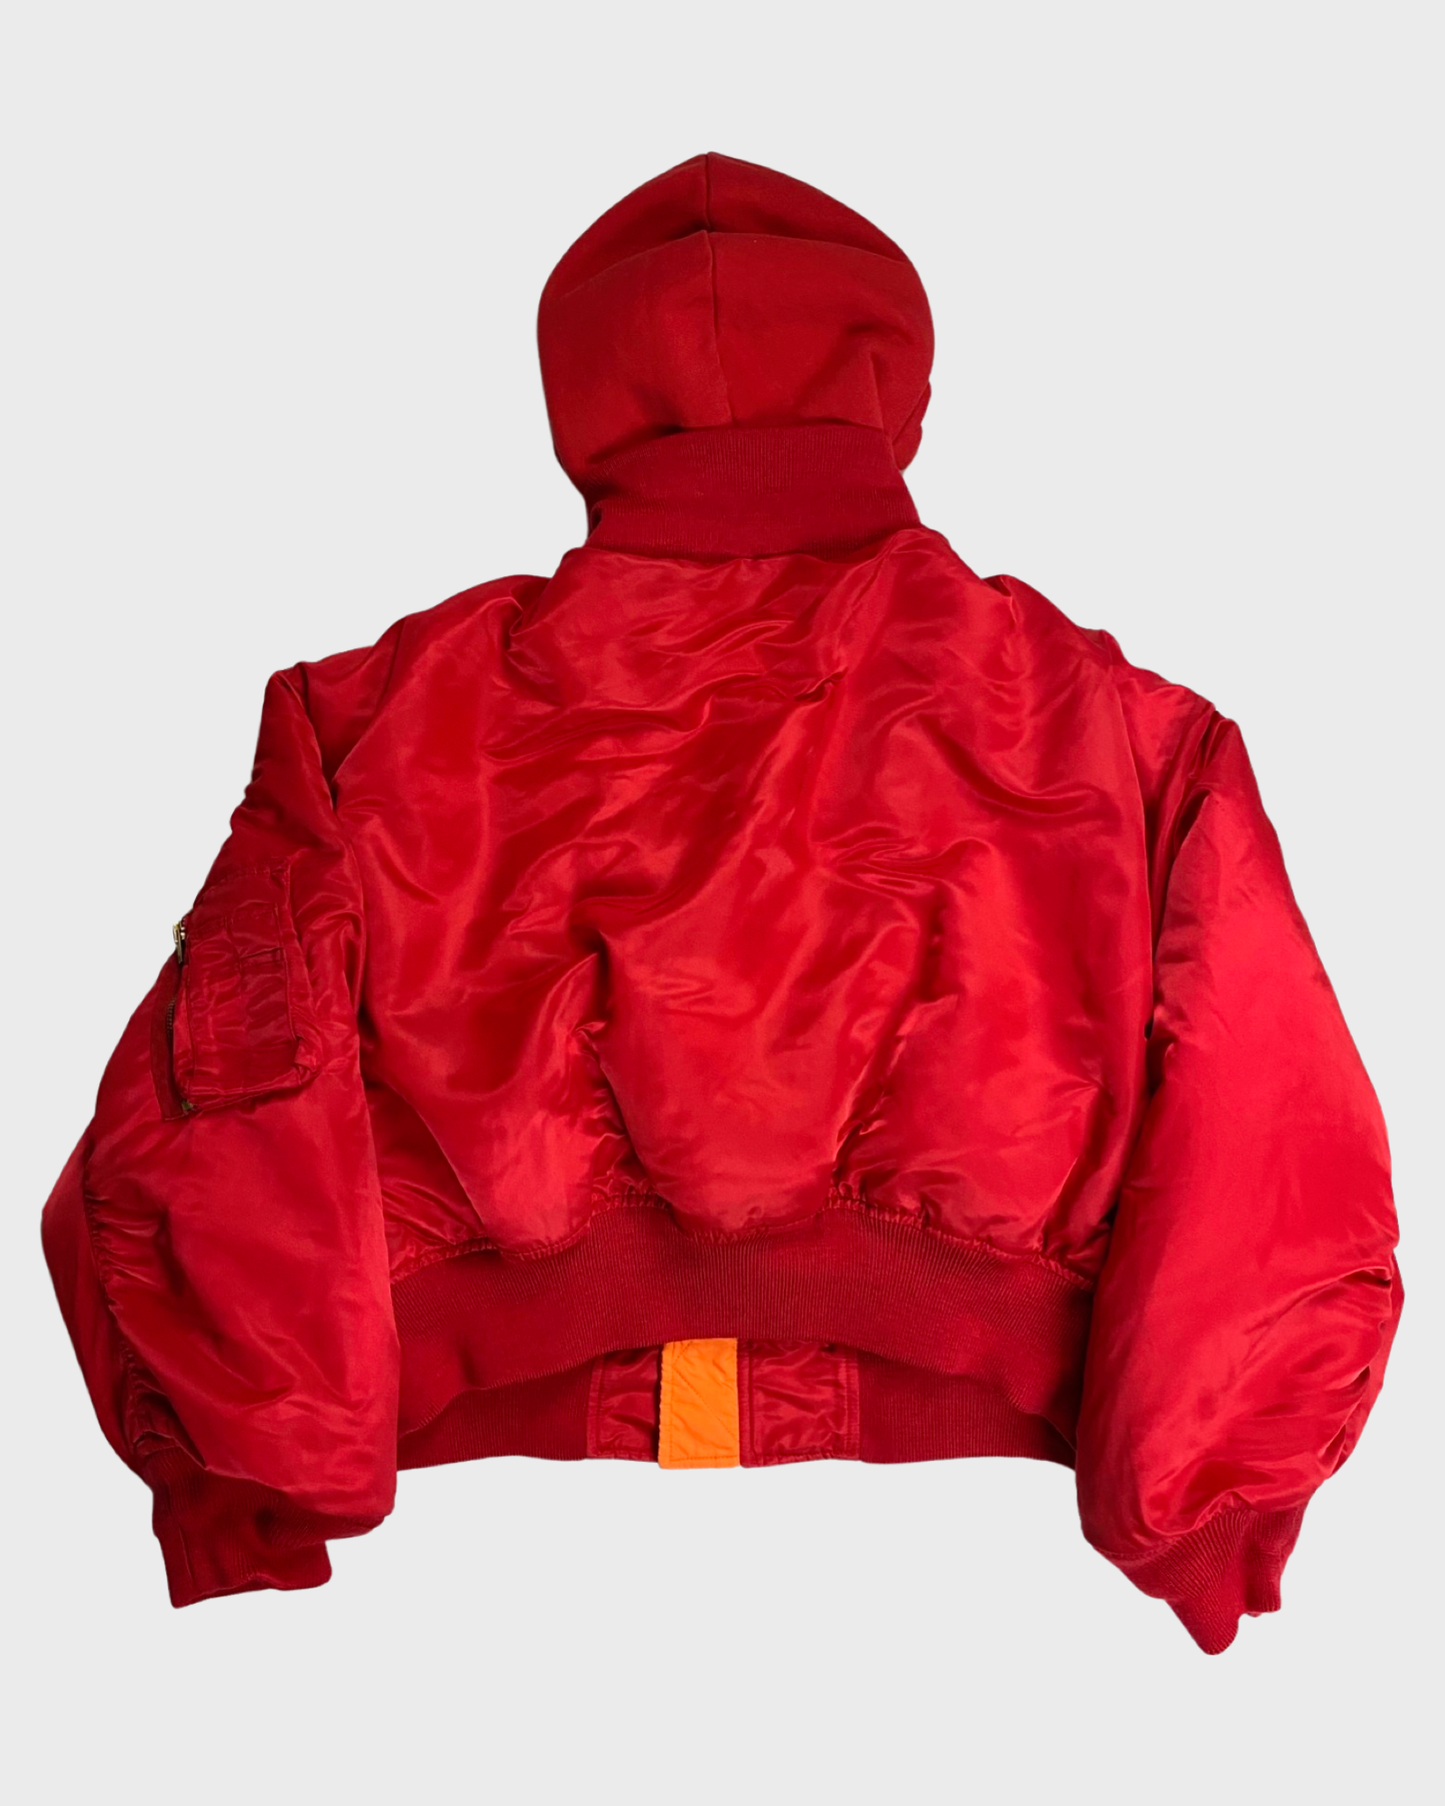 Vetements AW16 cropped red Bomber MA1 jacket SZ: S